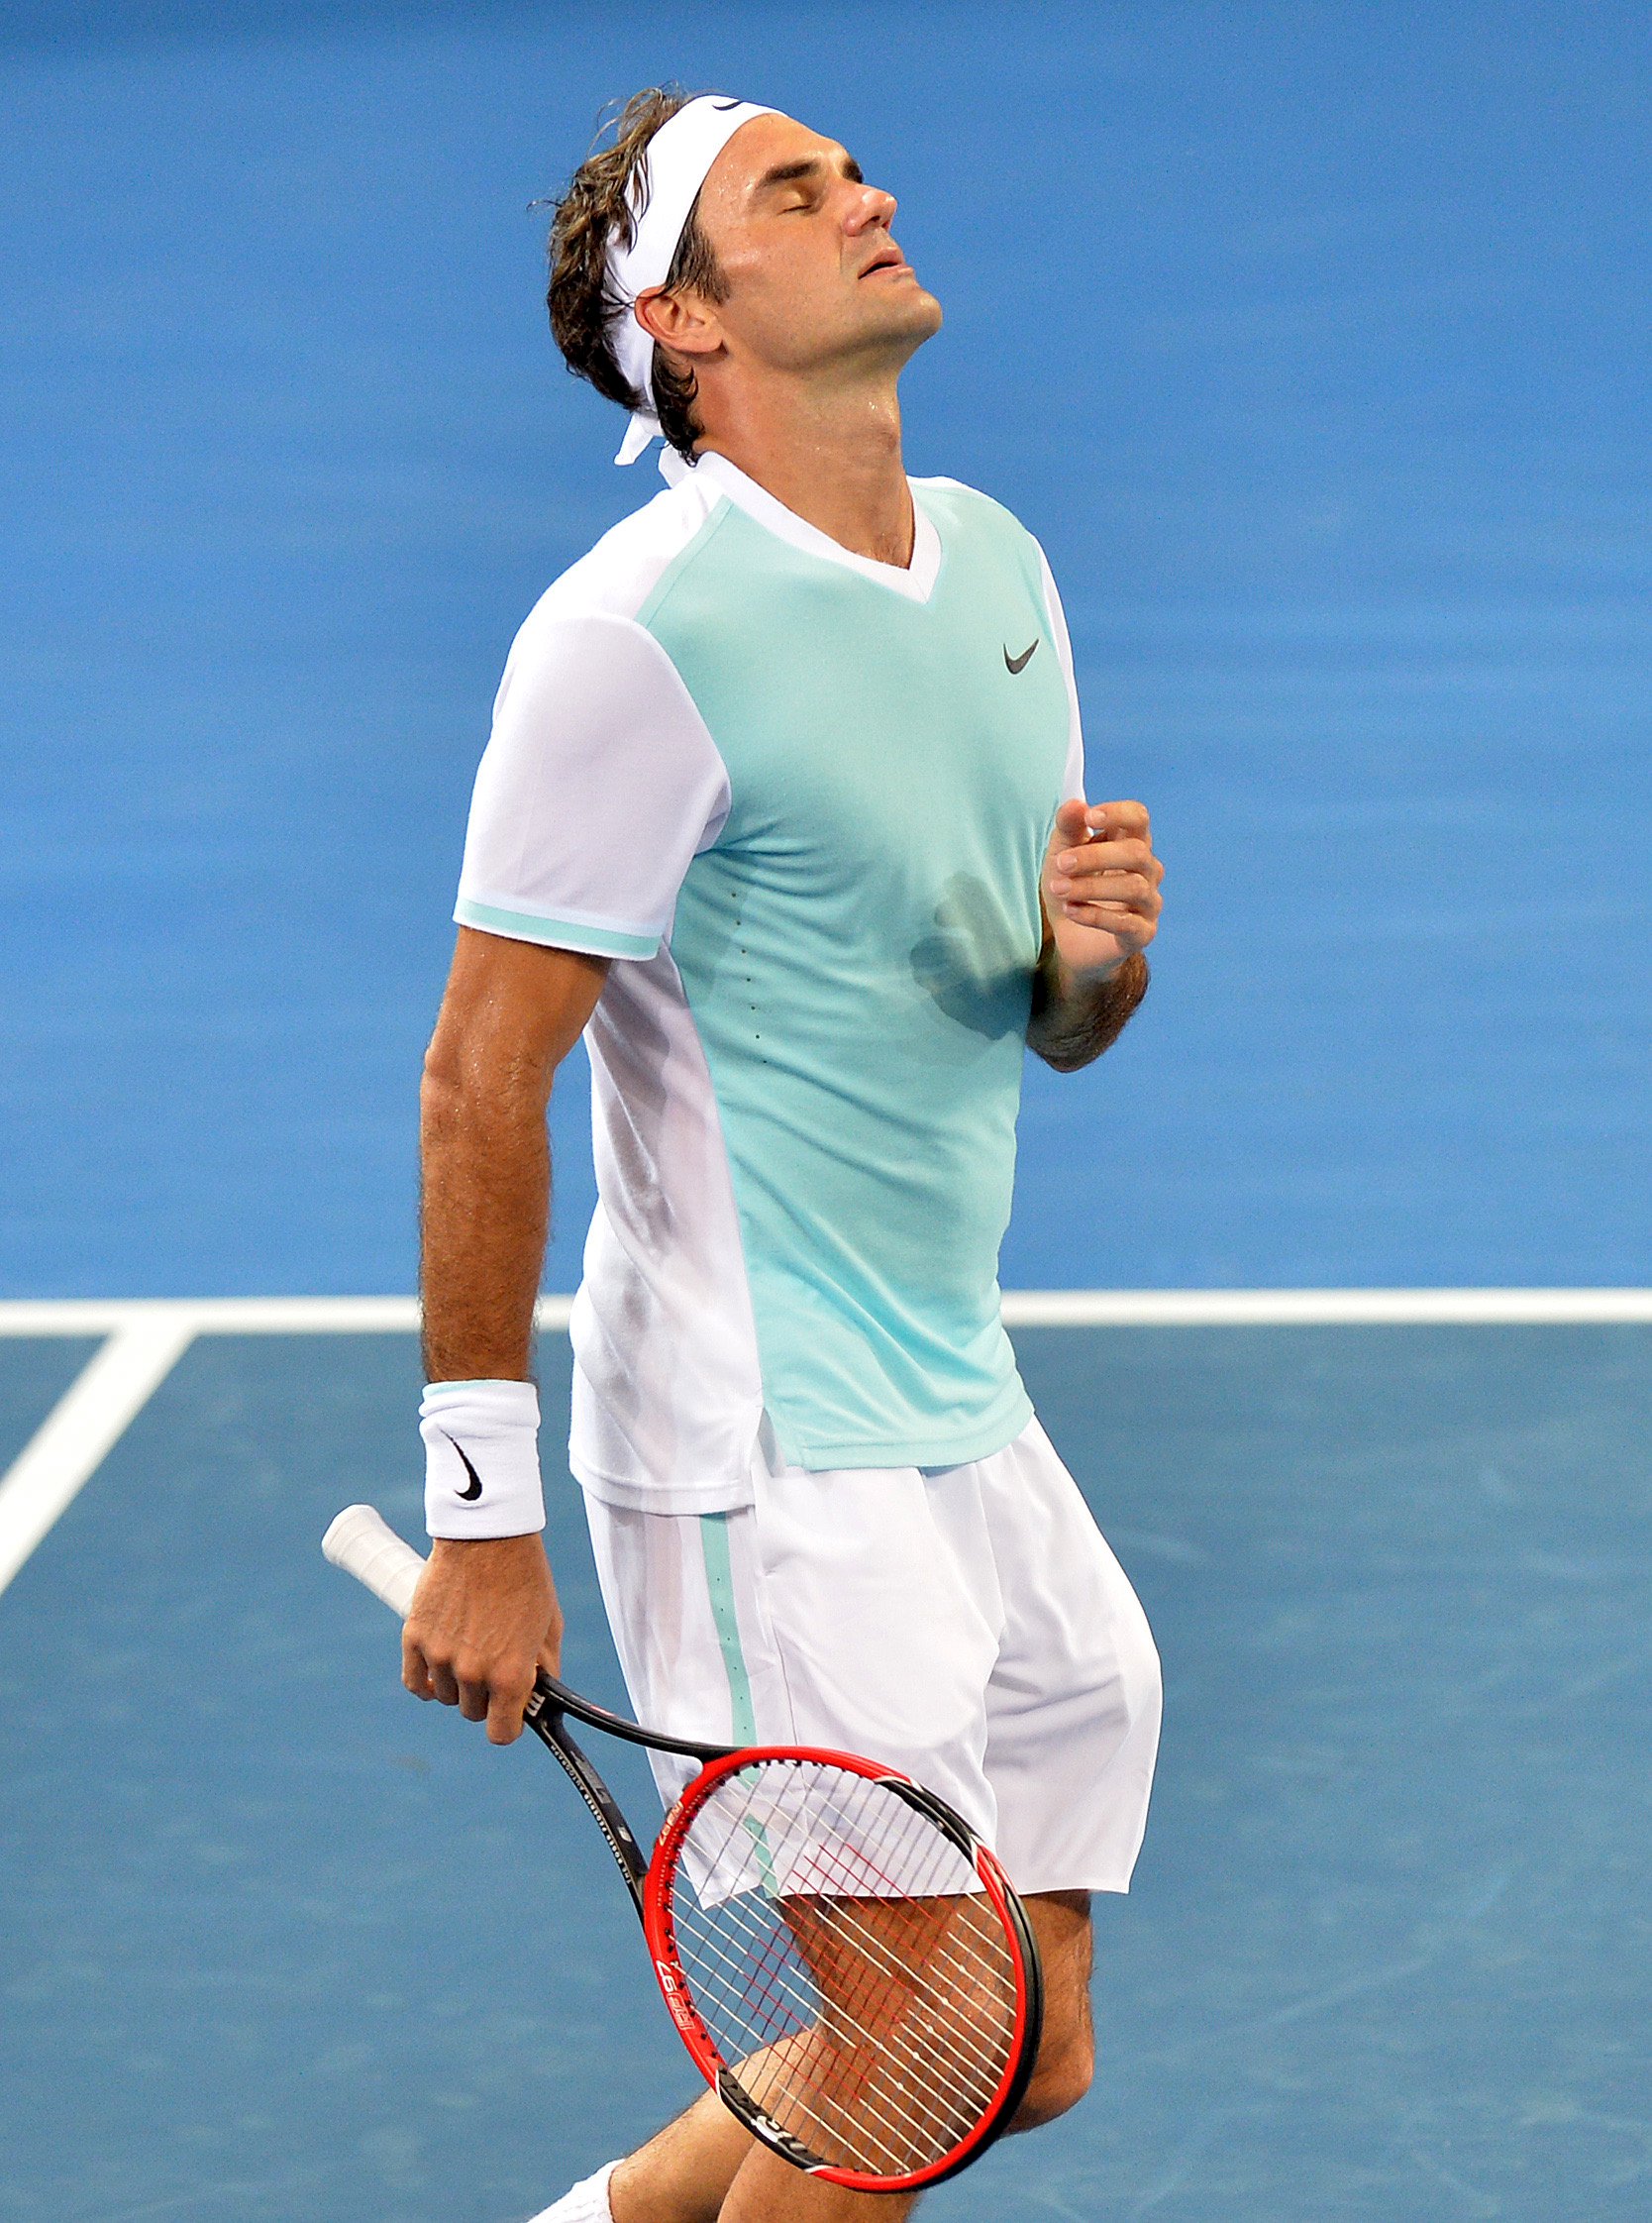 Roger Federer of Switzerland reacts during his men's singles final loss to Milos Raonic of Canada at the Brisbane International Tennis Tournament in Brisbane, Australia, January 10, 2016. REUTERS/Bradley Kanaris/AAP ATTENTION EDITORS - THIS PICTURE WAS PROVIDED BY A THIRD PARTY. IT IS DISTRIBUTED EXACTLY AS RECEIVED BY REUTERS, AS A SERVICE TO CLIENTS. EDITORIAL USE ONLY. NOT FOR SALE FOR MARKETING OR ADVERTISING CAMPAIGNS. NO RESALES. NO ARCHIVE. AUSTRALIA OUT. NO COMMERCIAL OR EDITORIAL SALES IN AUSTRALIA. NEW ZEALAND OUT. NO COMMERCIAL OR EDITORIAL SALES IN NEW ZEALAND.